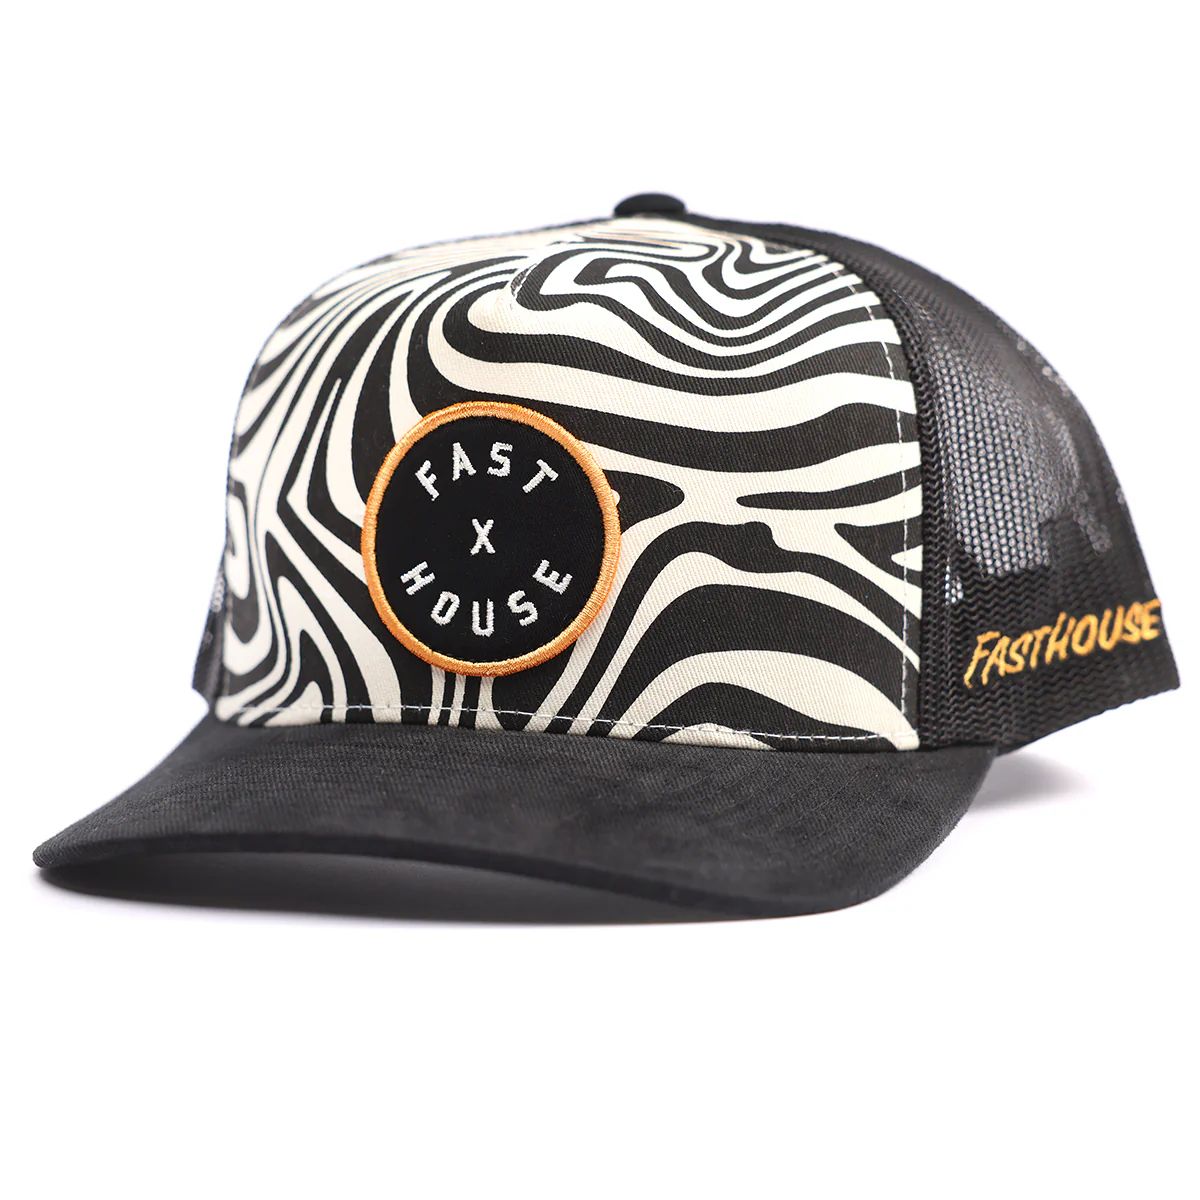 Fasthouse Smoke Show Hat Black White Swirl OS - Fasthouse Hats